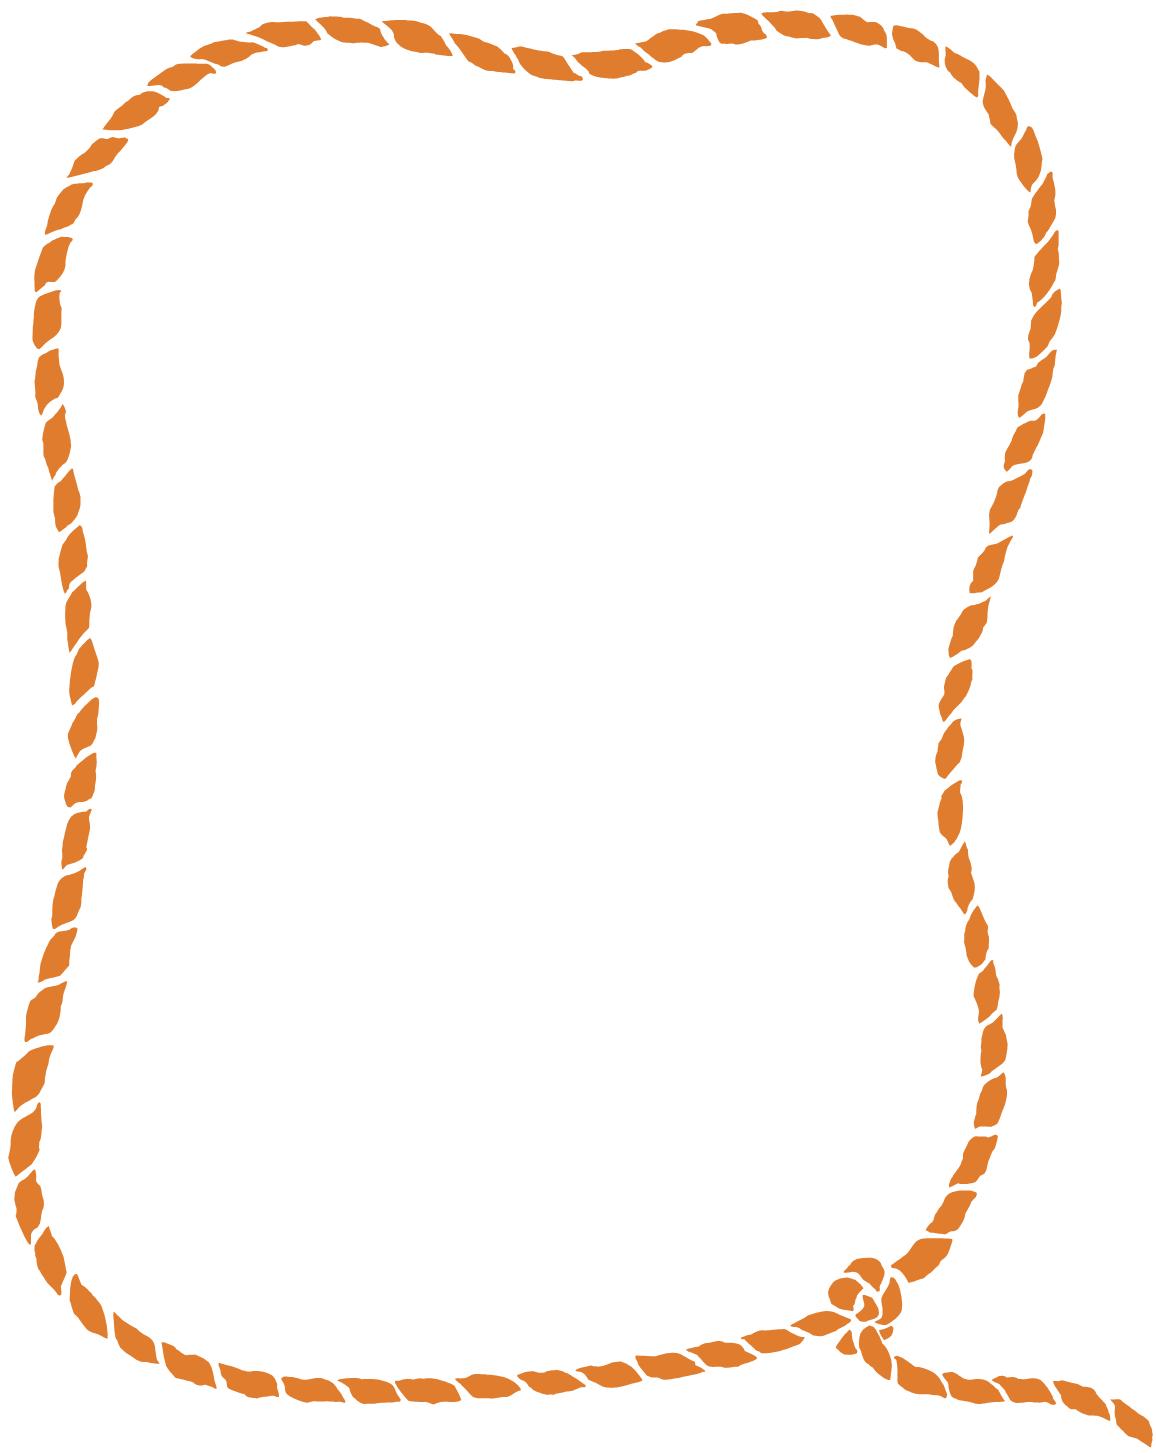 Rope Clipart Border